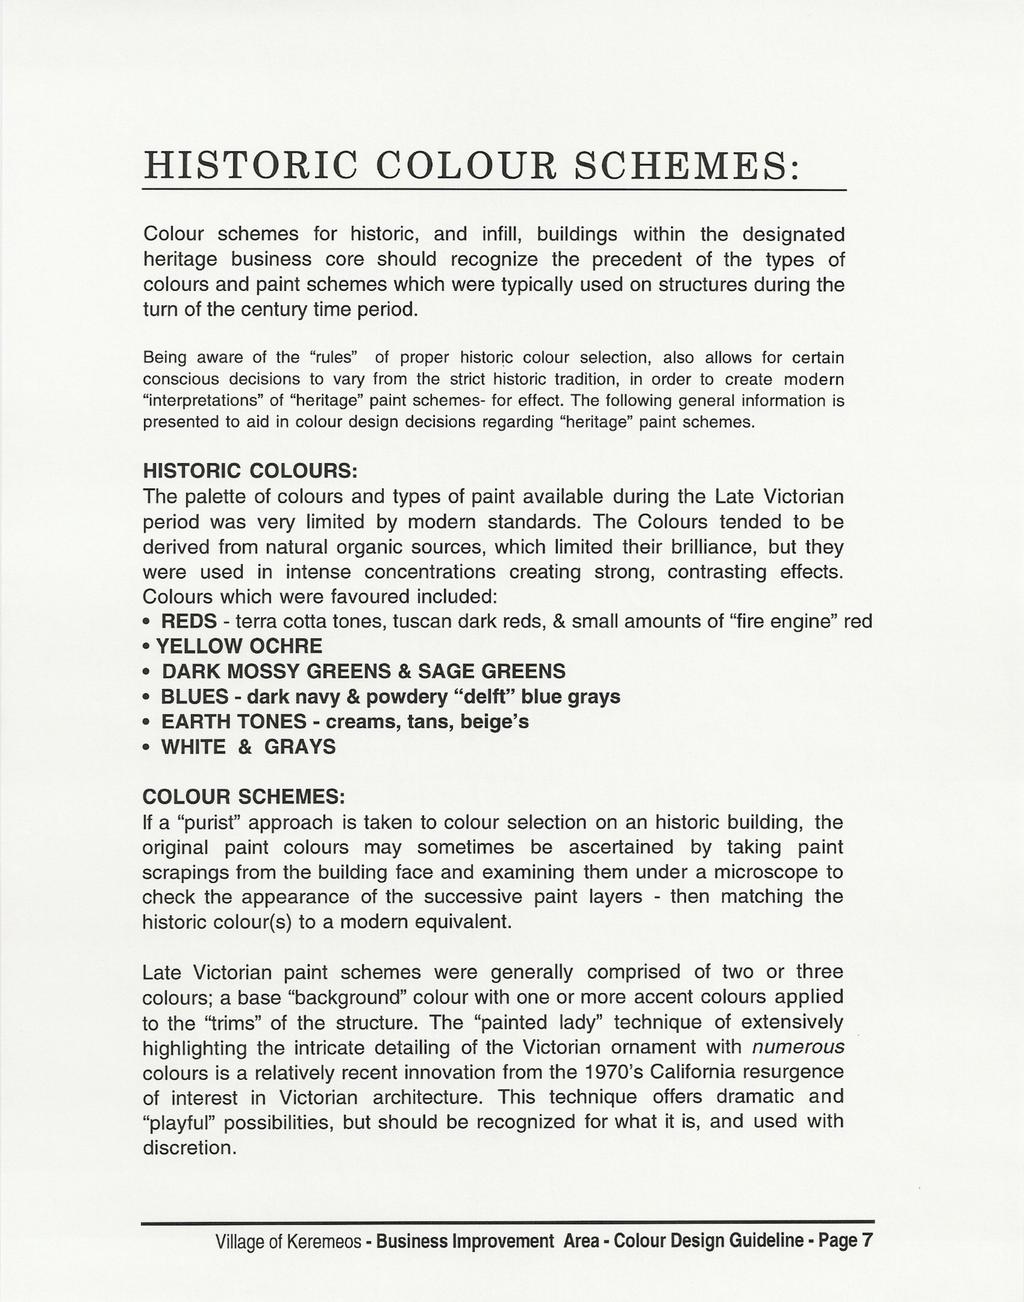 HISTORIC COLOUR SCHEMES: Colour schemes for historic, and infill, buildings within the designated heritage business core should recognize the precedent of the types of colours and paint schemes which